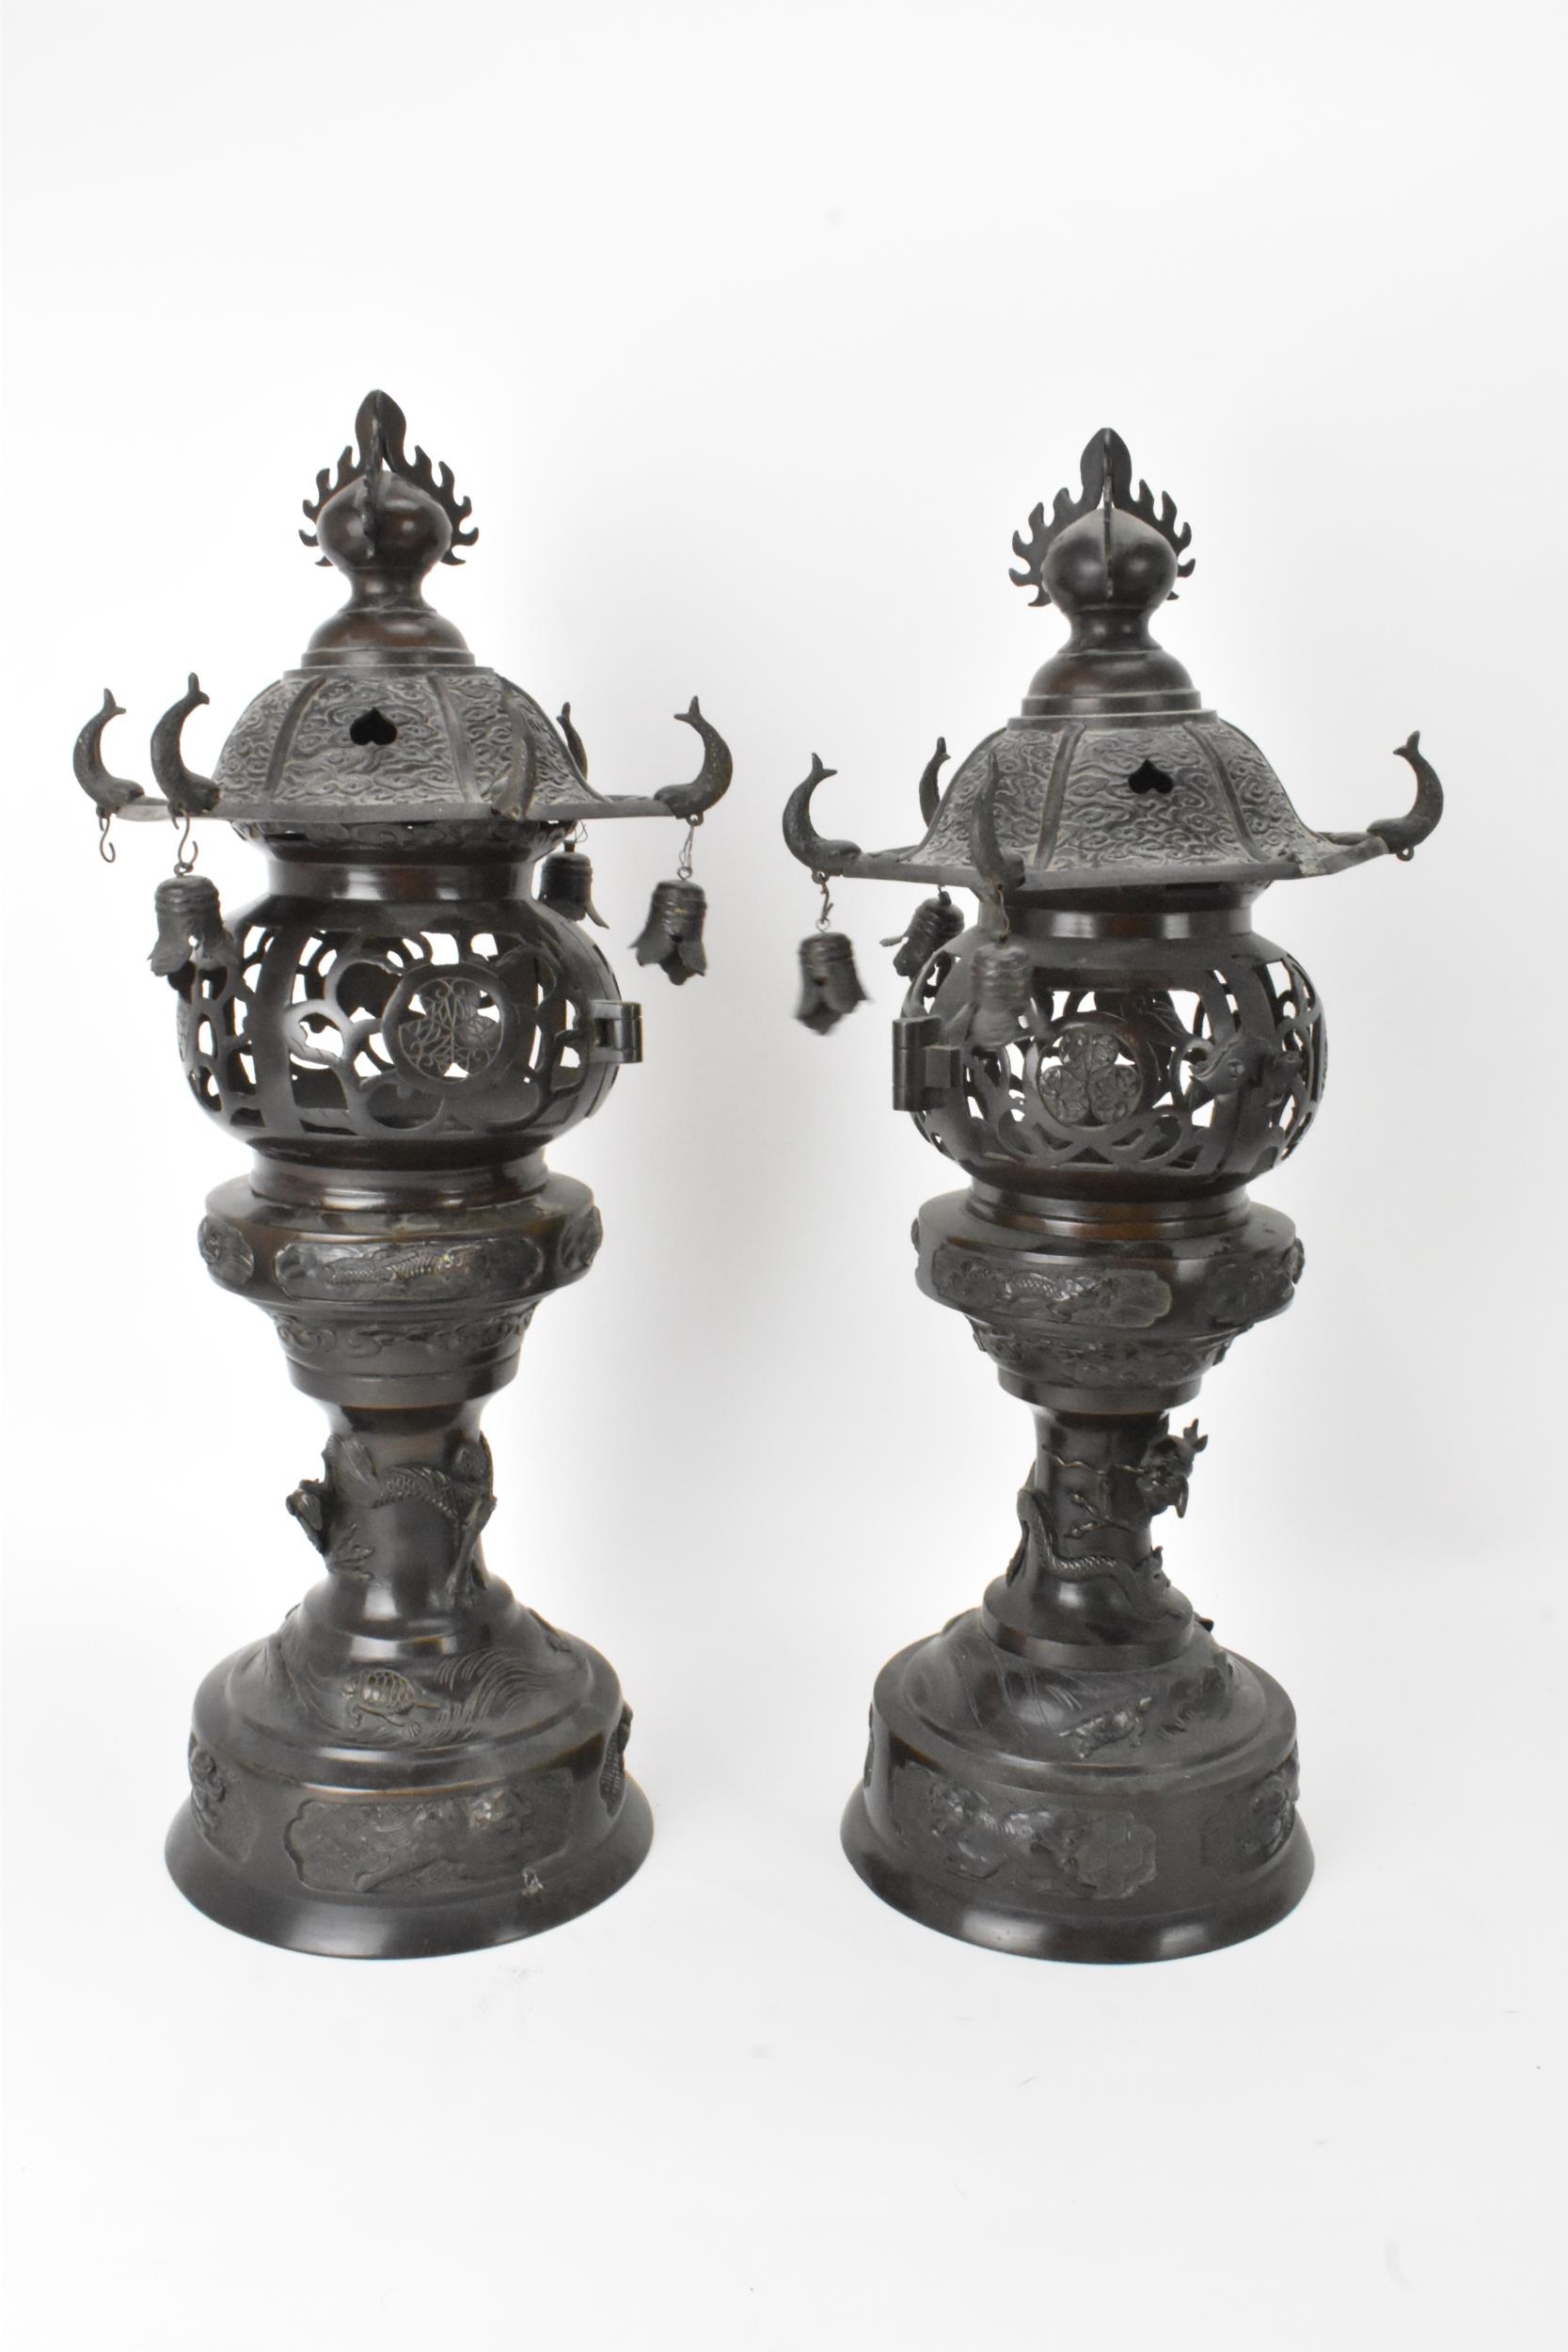 A pair of Japanese Meiji period bronze koros in the form of temples with pagoda roof with bells, - Image 4 of 7